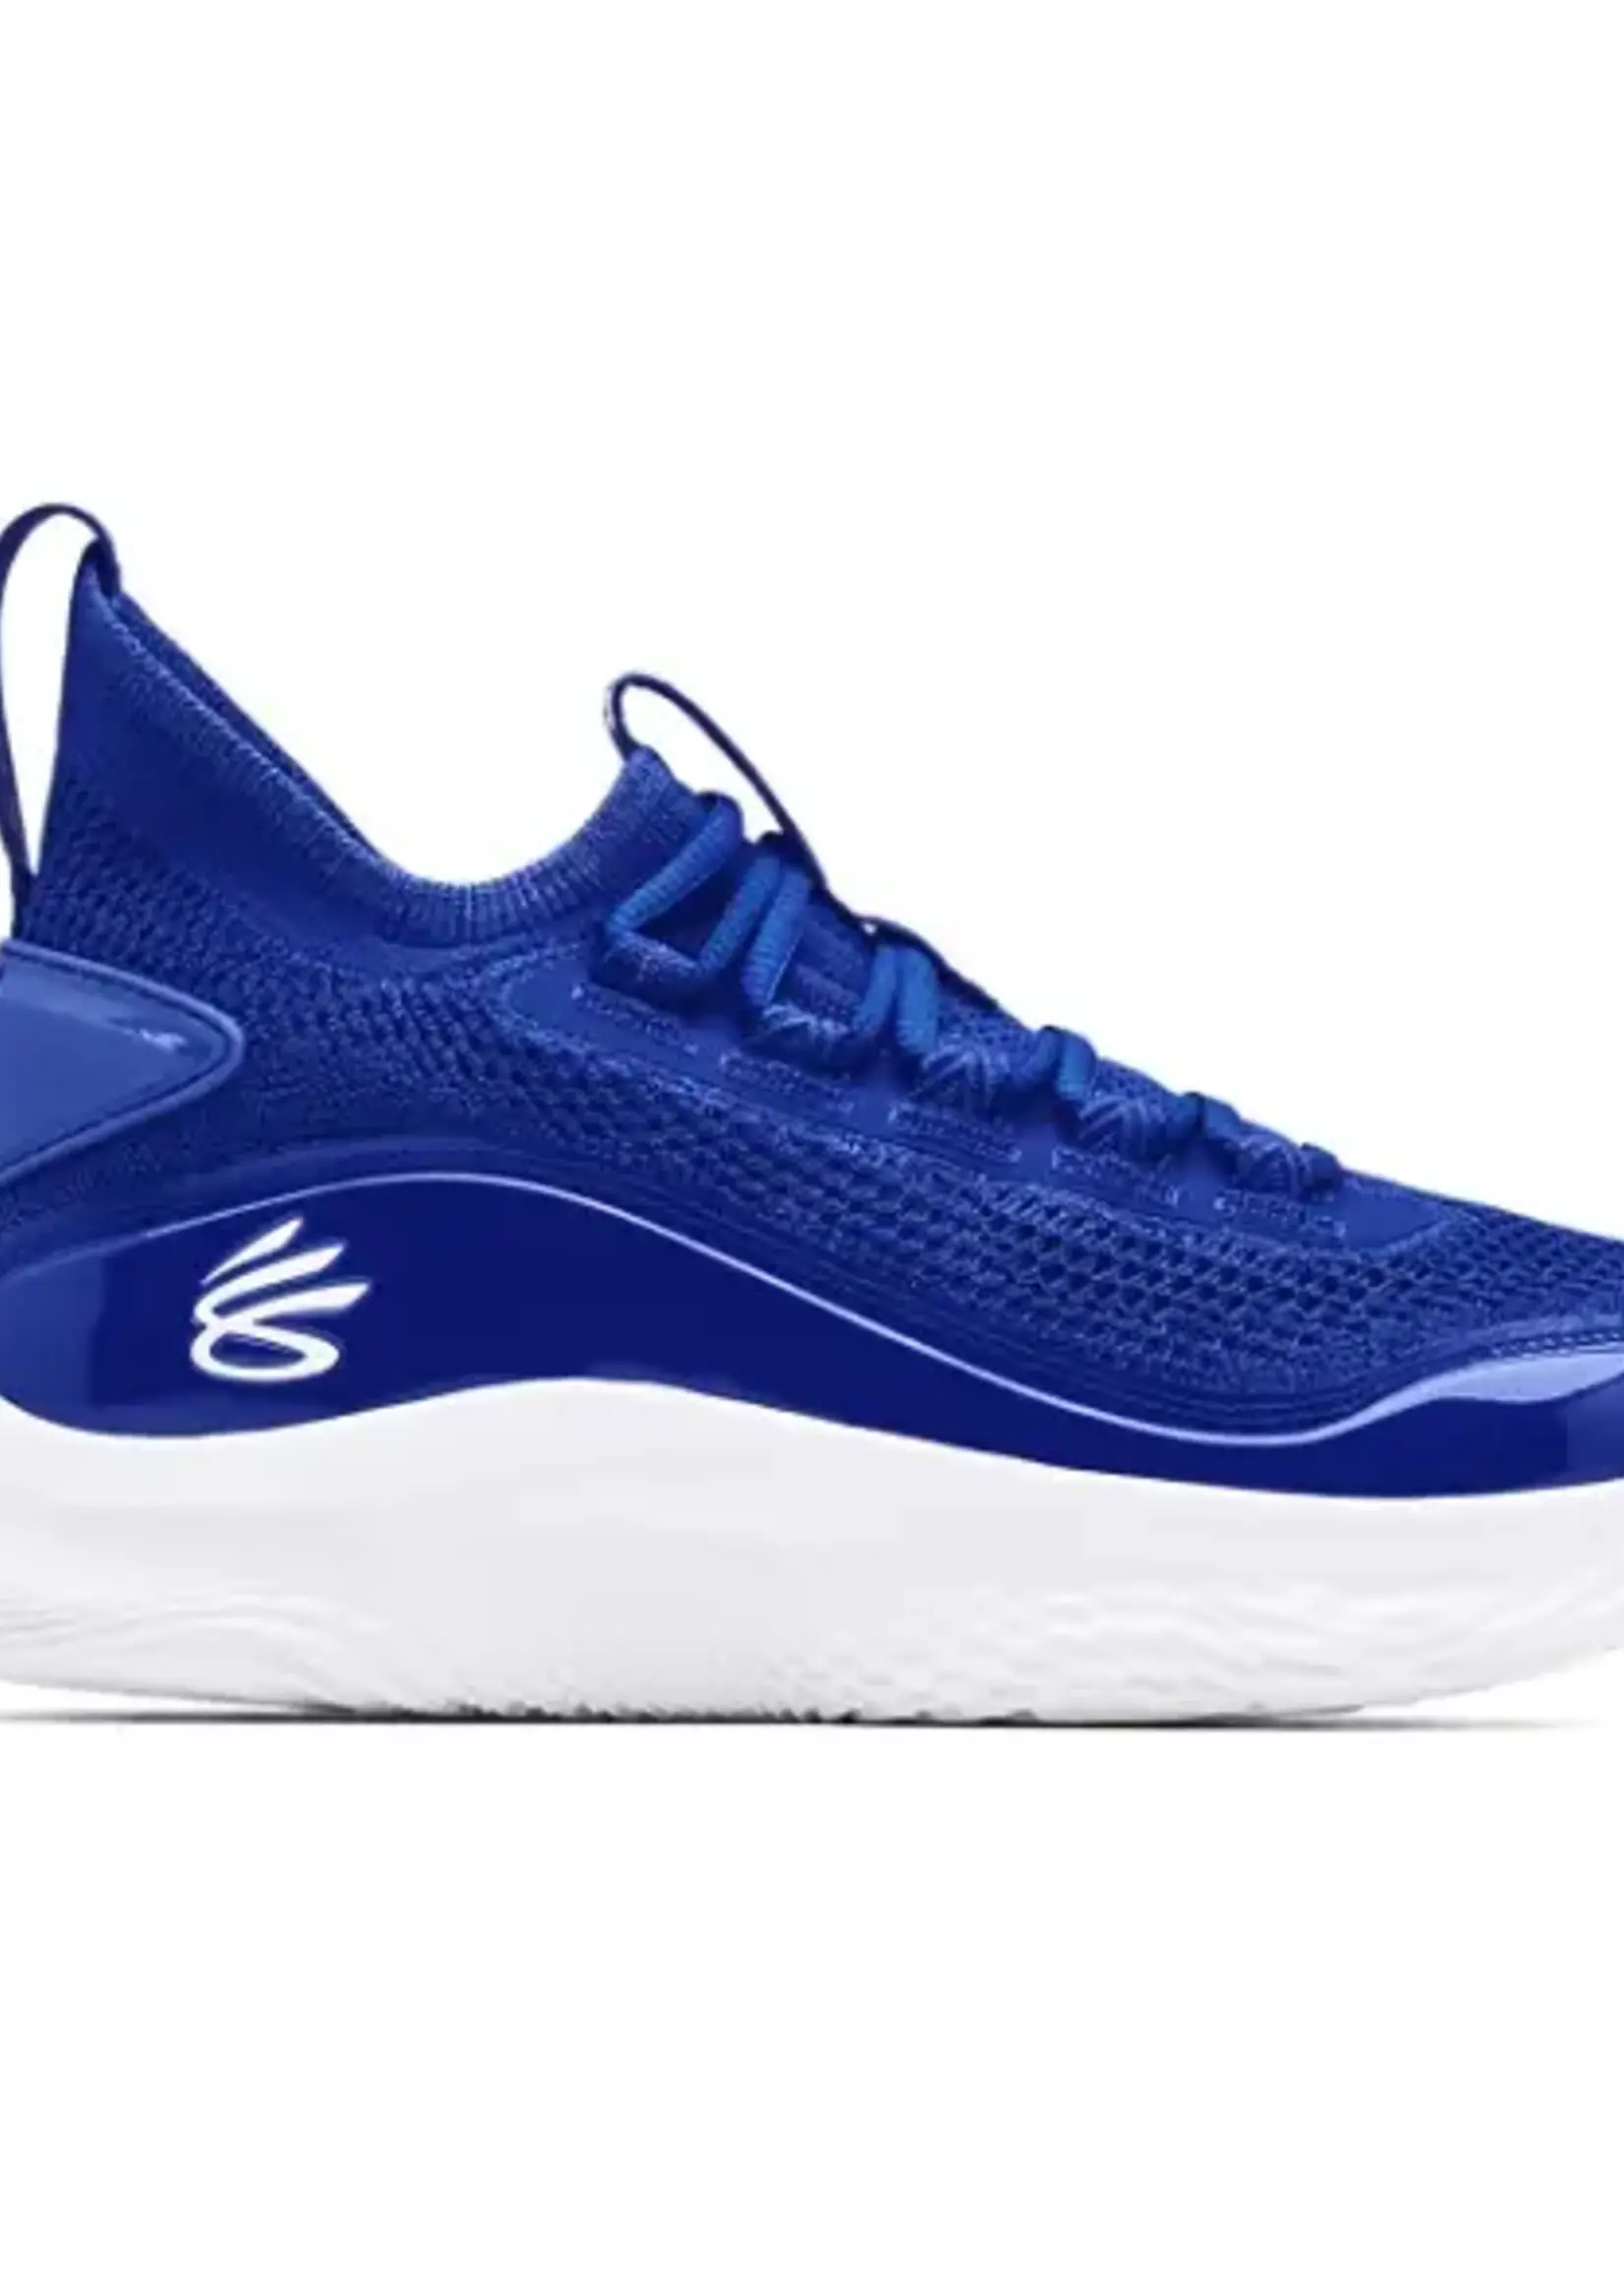 Under Armour UNISEX CURRY 8 TEAM BASKETBALL SHOES 3024785